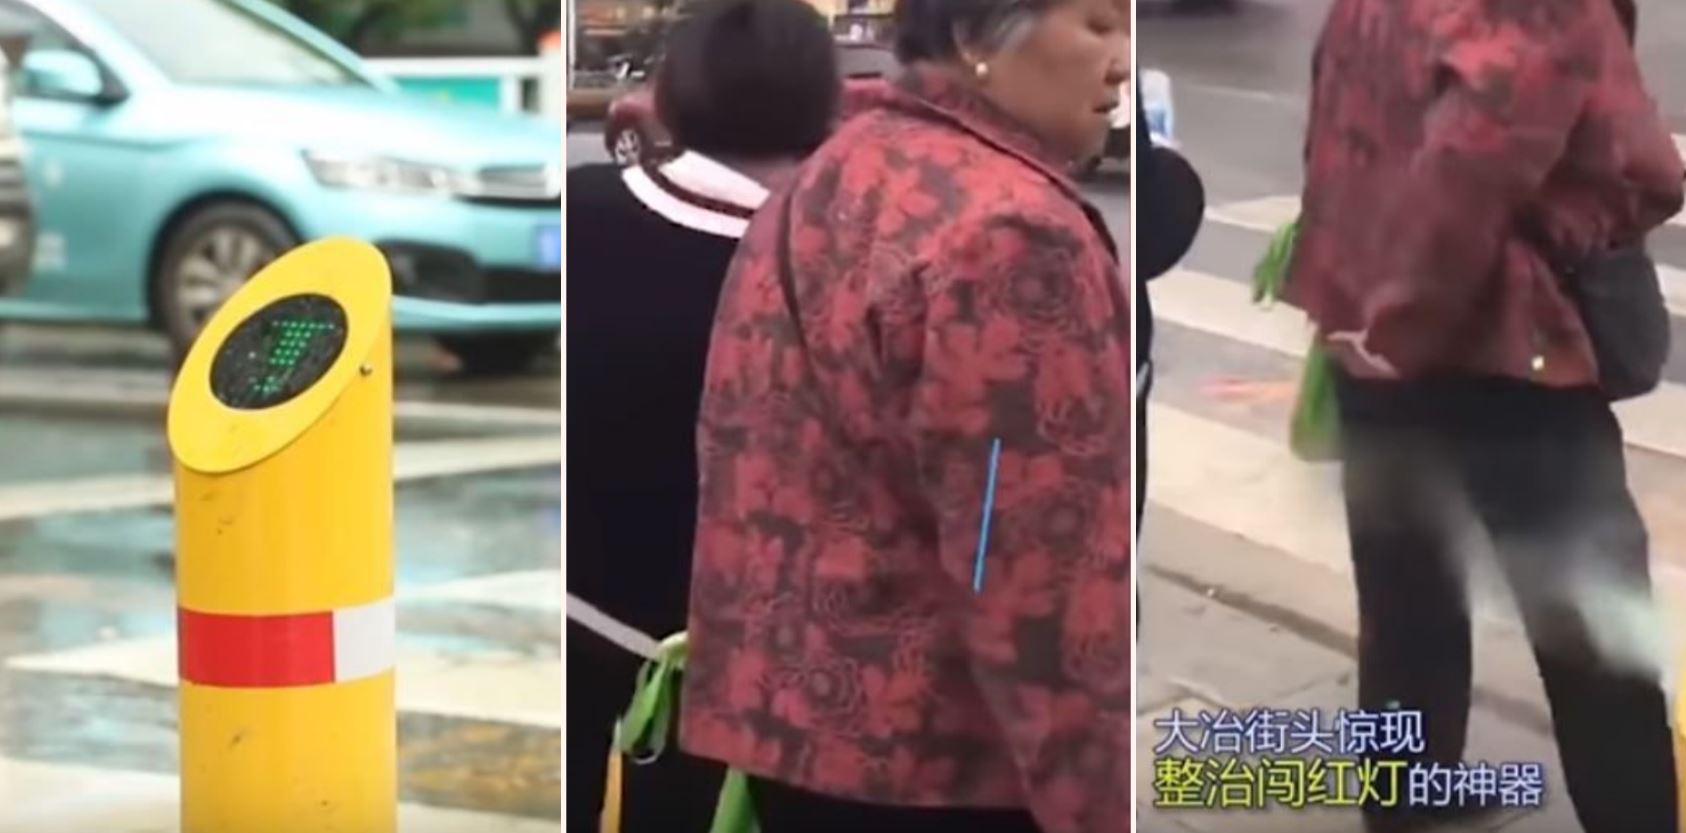 China has started punishing jaywalkers by spraying them with cold water for crossing at red lights